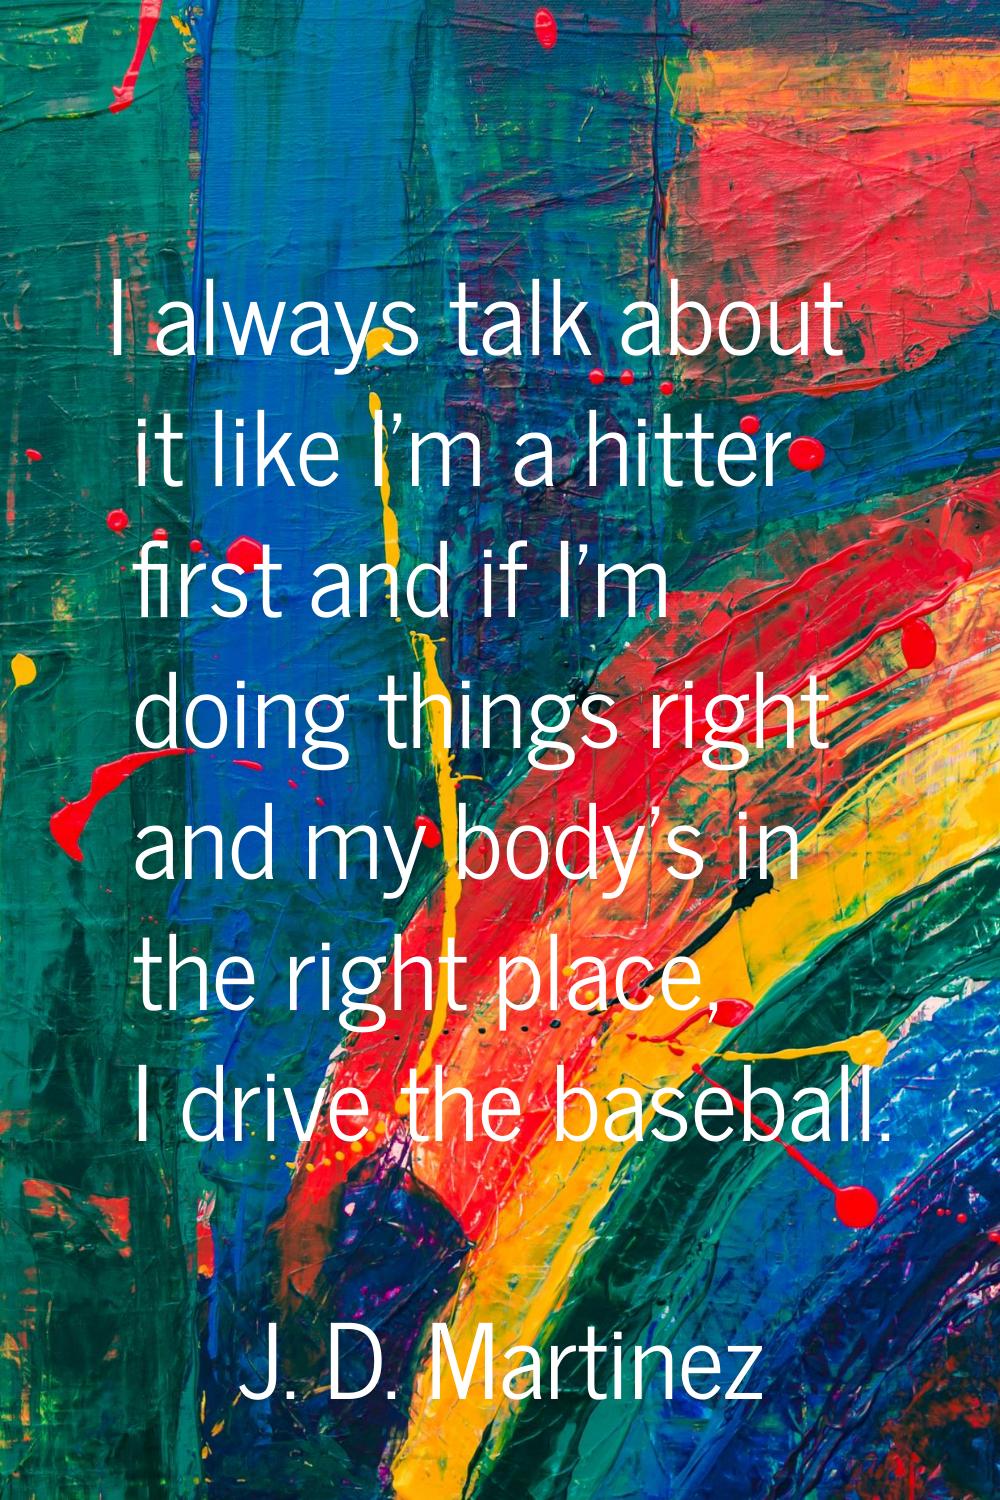 I always talk about it like I'm a hitter first and if I'm doing things right and my body's in the r